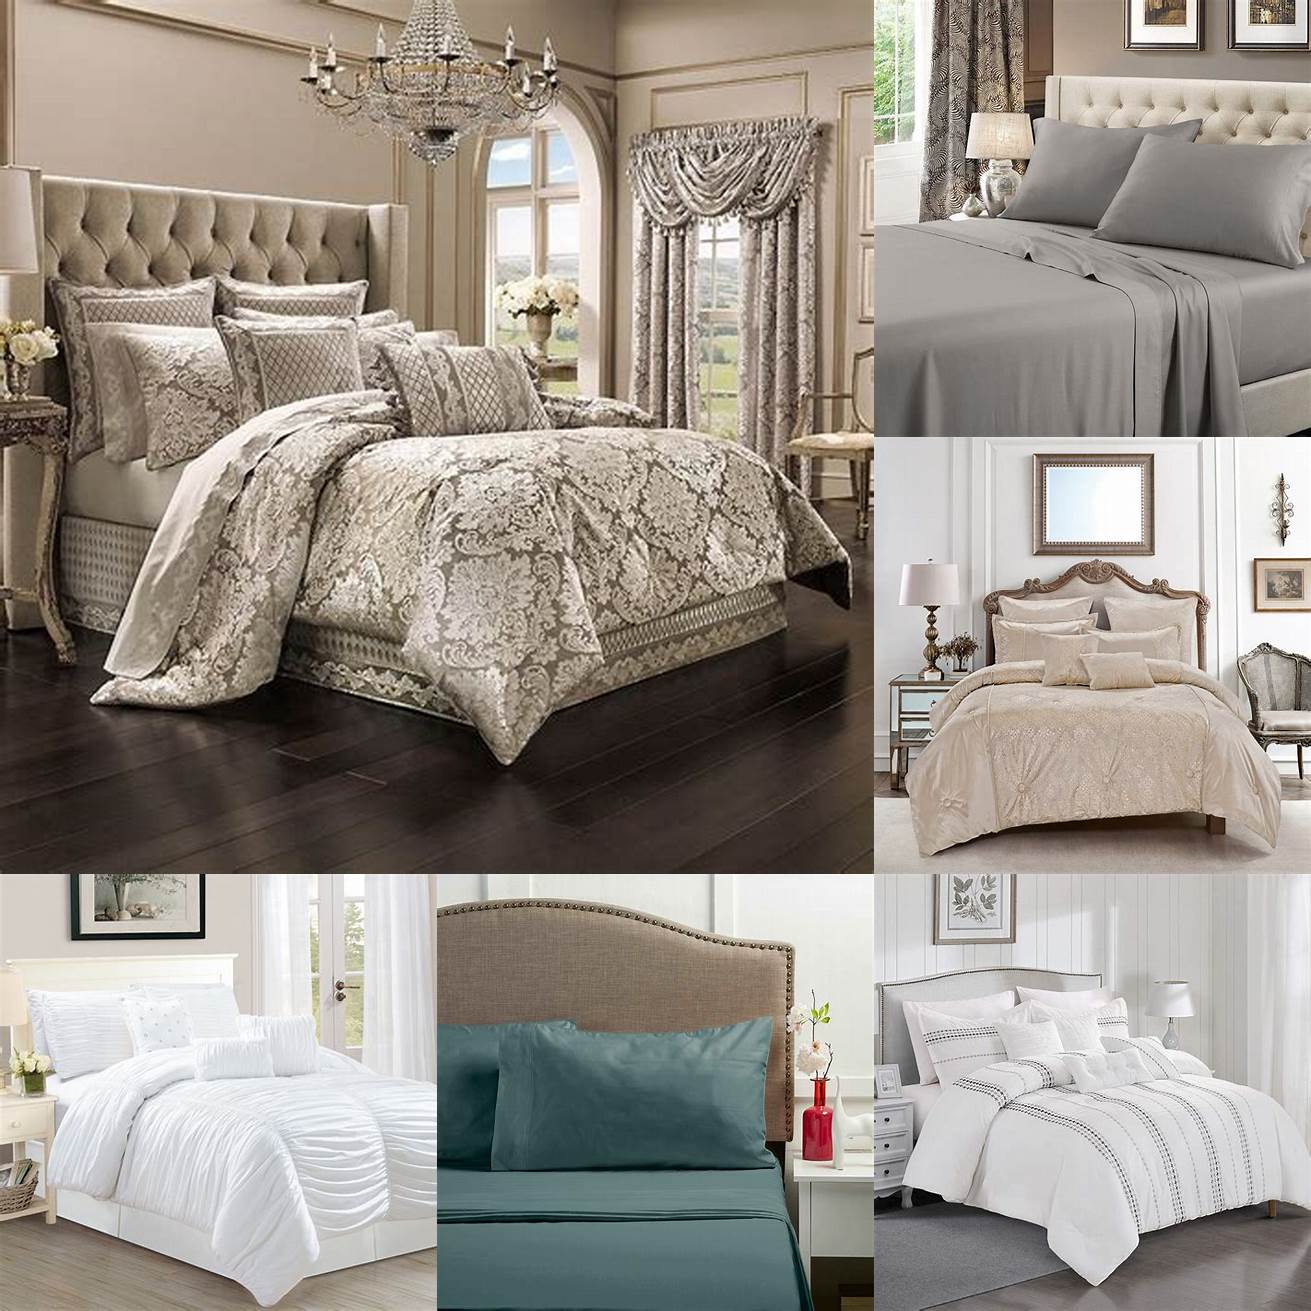 4 A luxury Queen Bed Set with high-thread-count sheets and high-quality fabrics